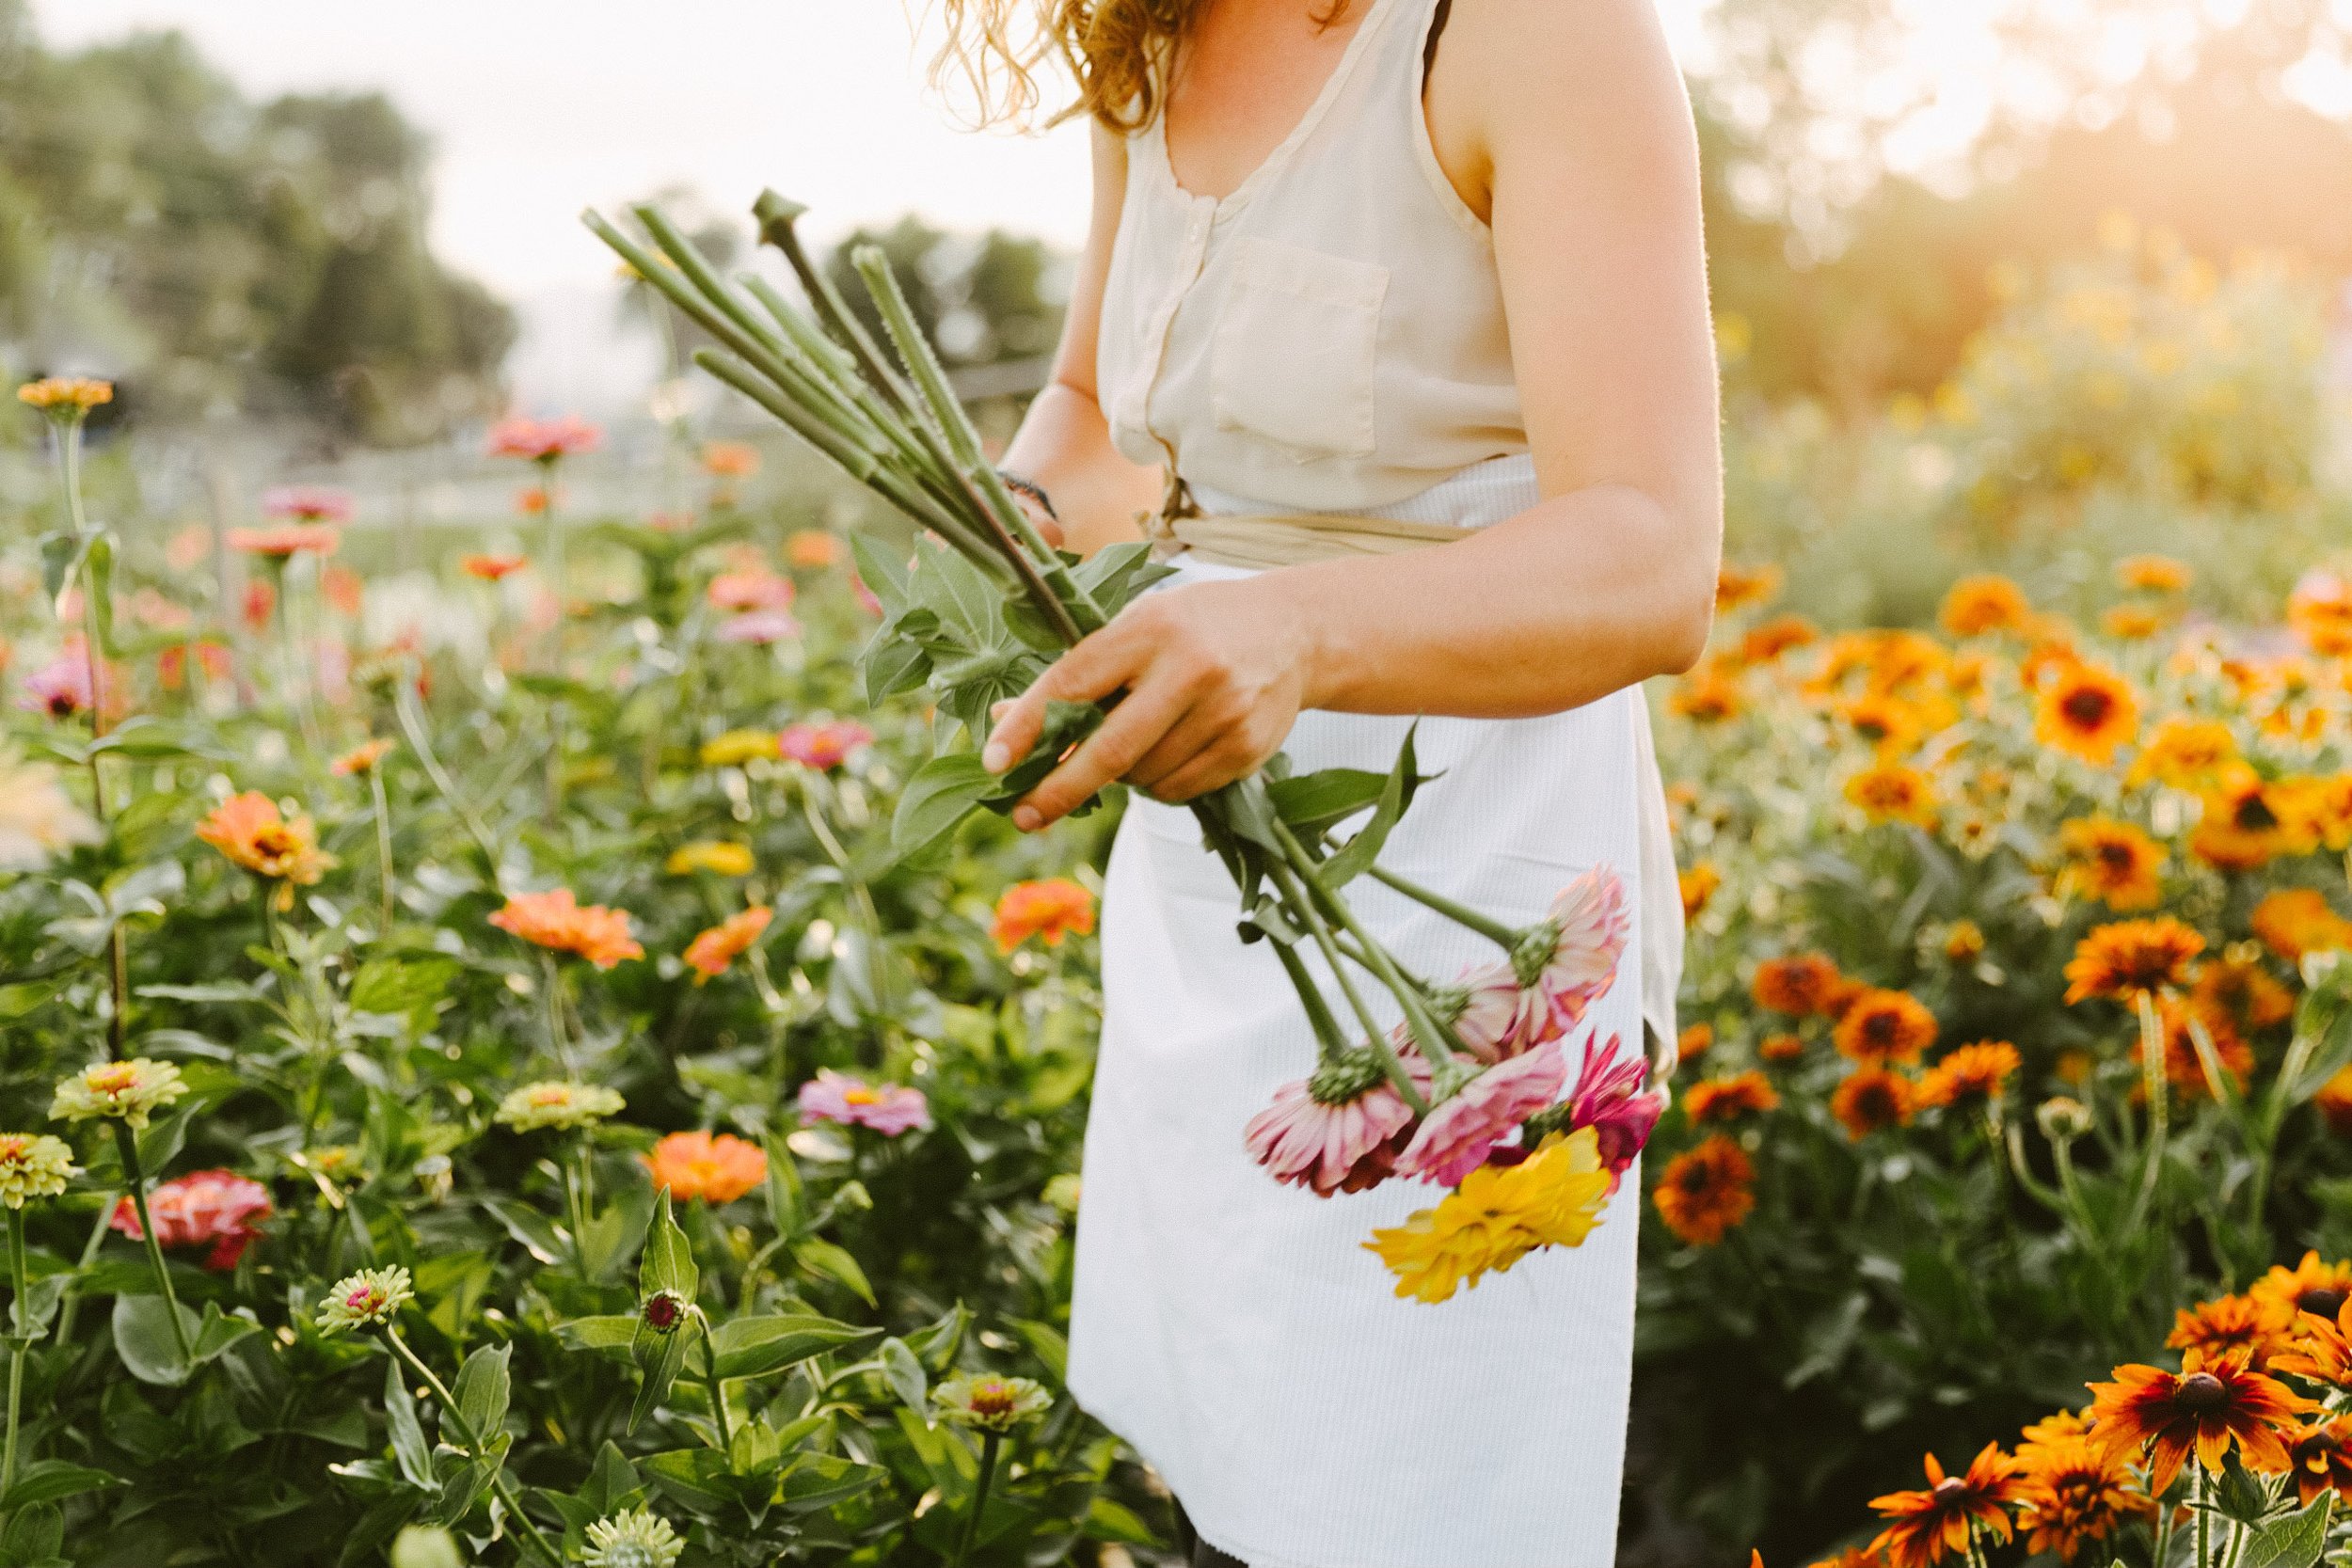  White Caucasian woman with a white apron collecting Zinnias flowers on a field 